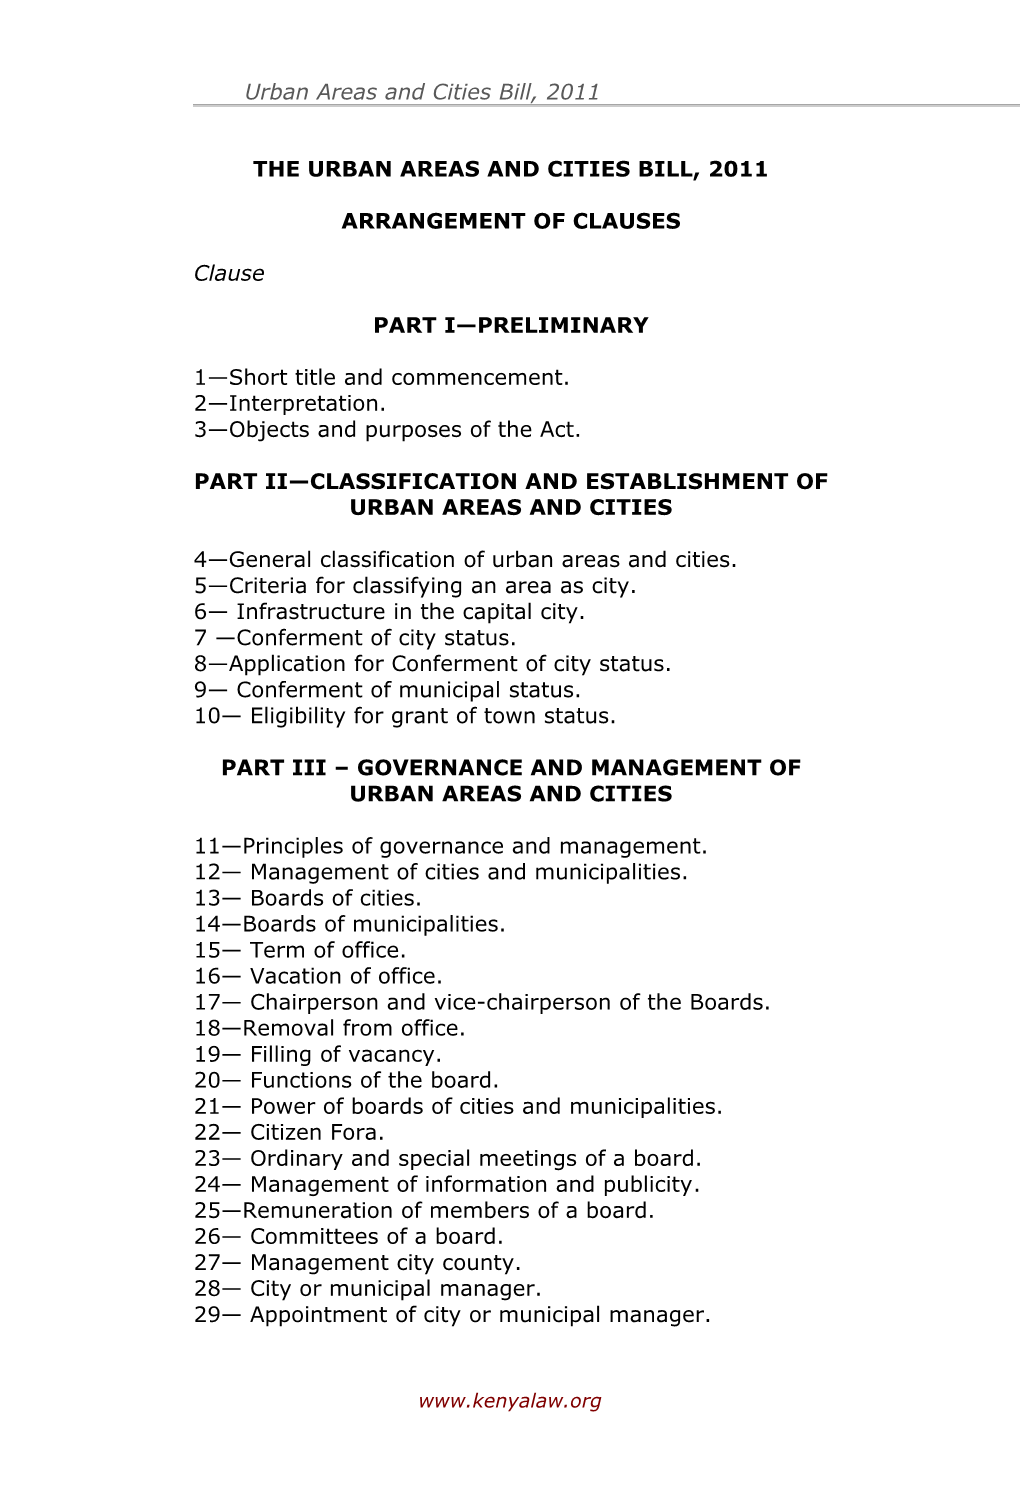 The Urban Areas and Cities Bill, 2011